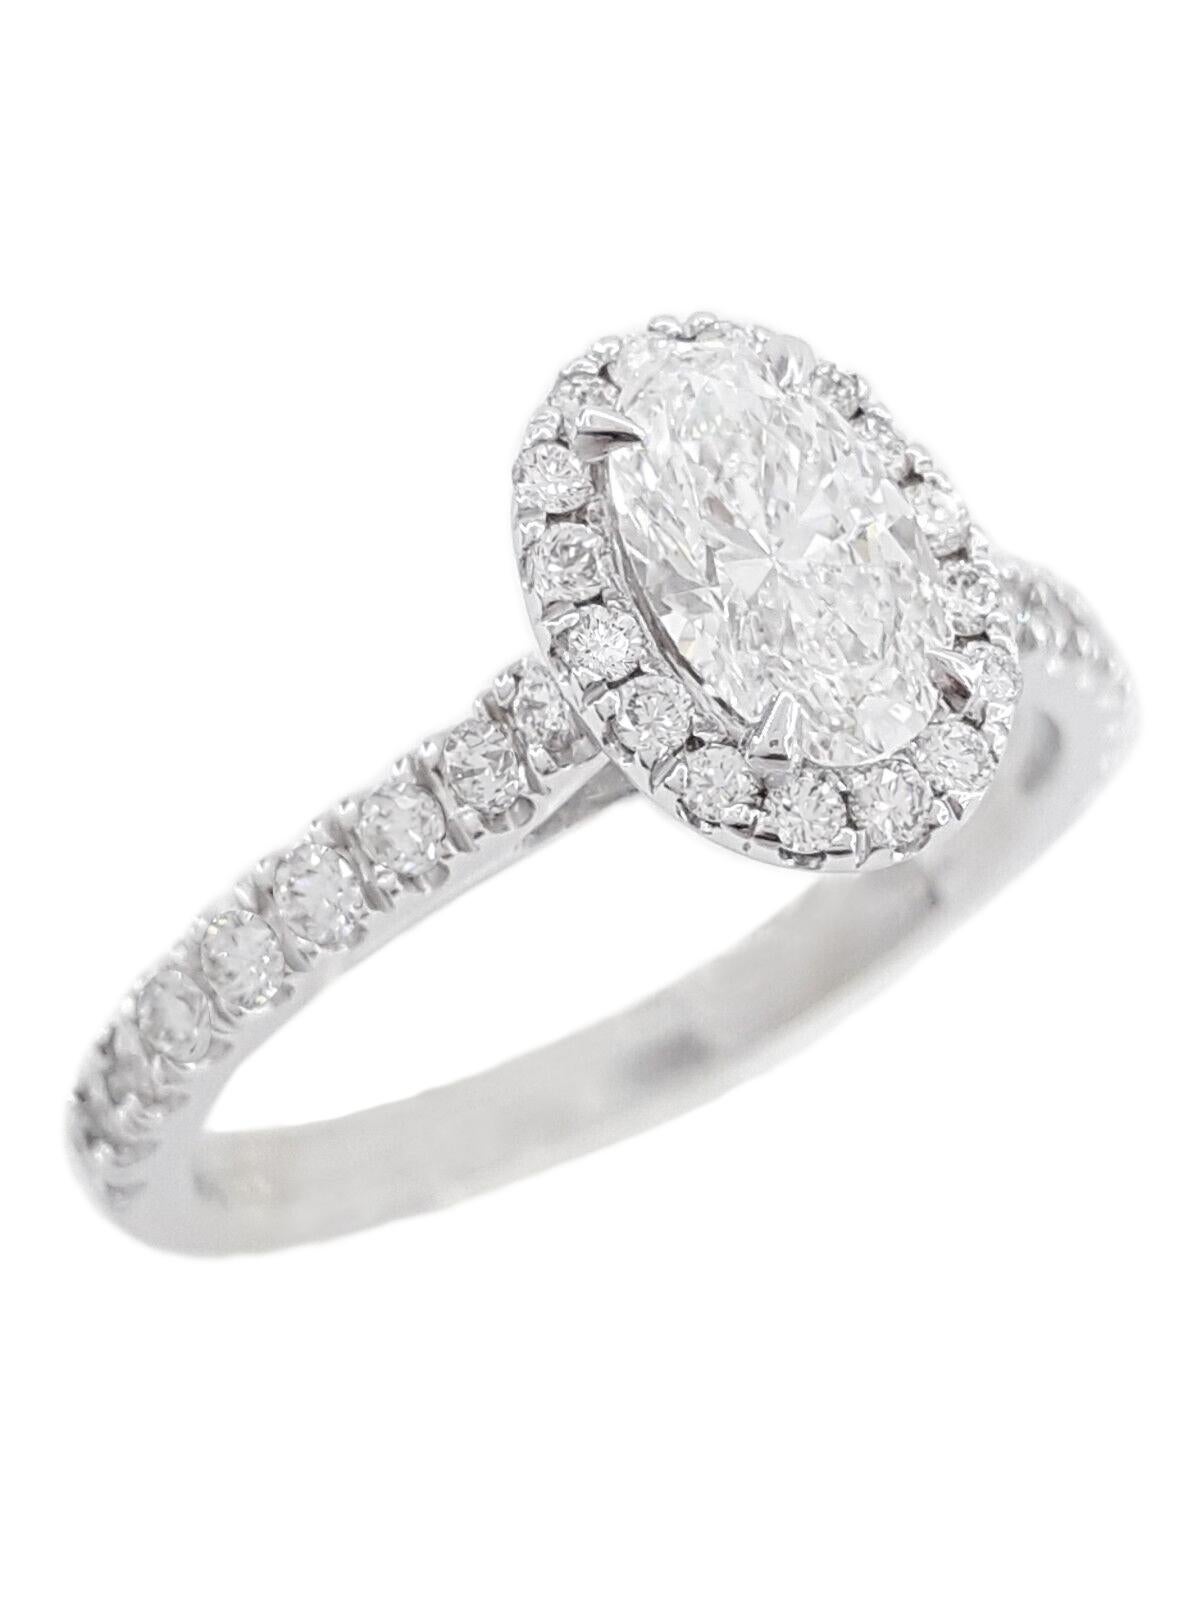 This stunning 2 carat F color VS clarity oval brilliant cut diamond ring in 18K white gold features a captivating halo setting adorned with pavé diamonds, exuding timeless elegance and sophistication. 
At the heart of this exquisite ring is a